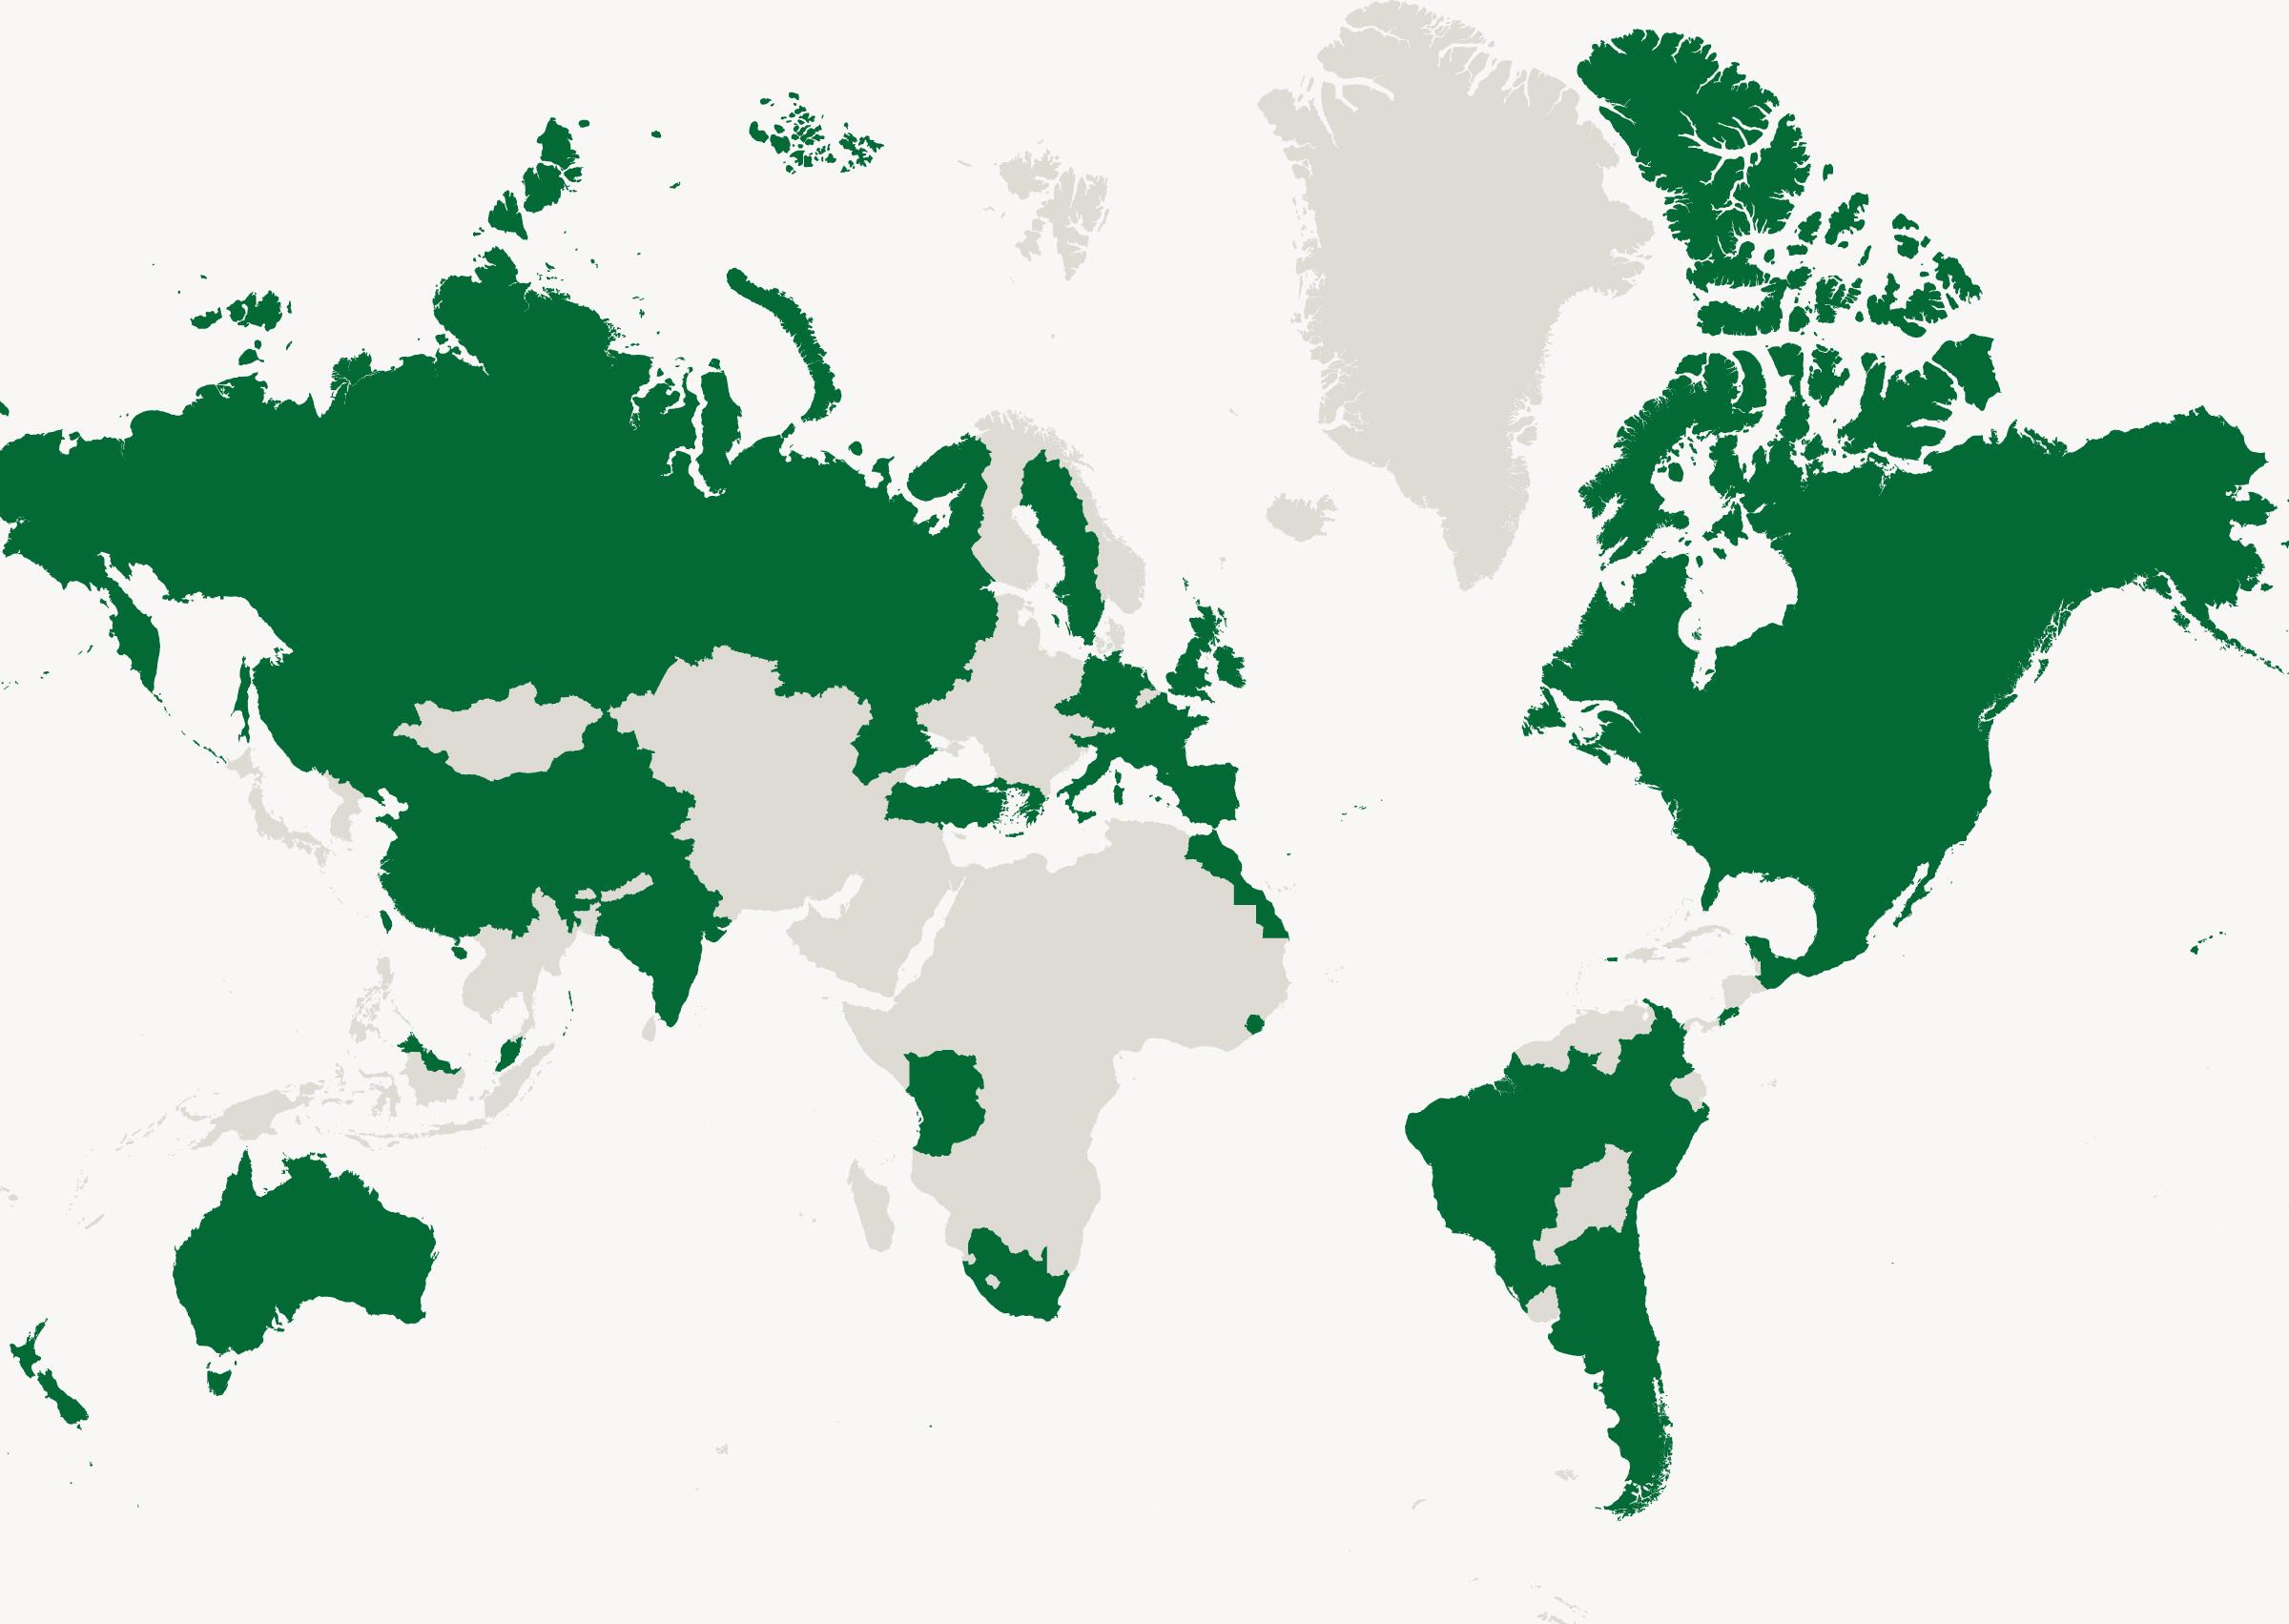 map view of Arbor Day Foundation's international community planting partners